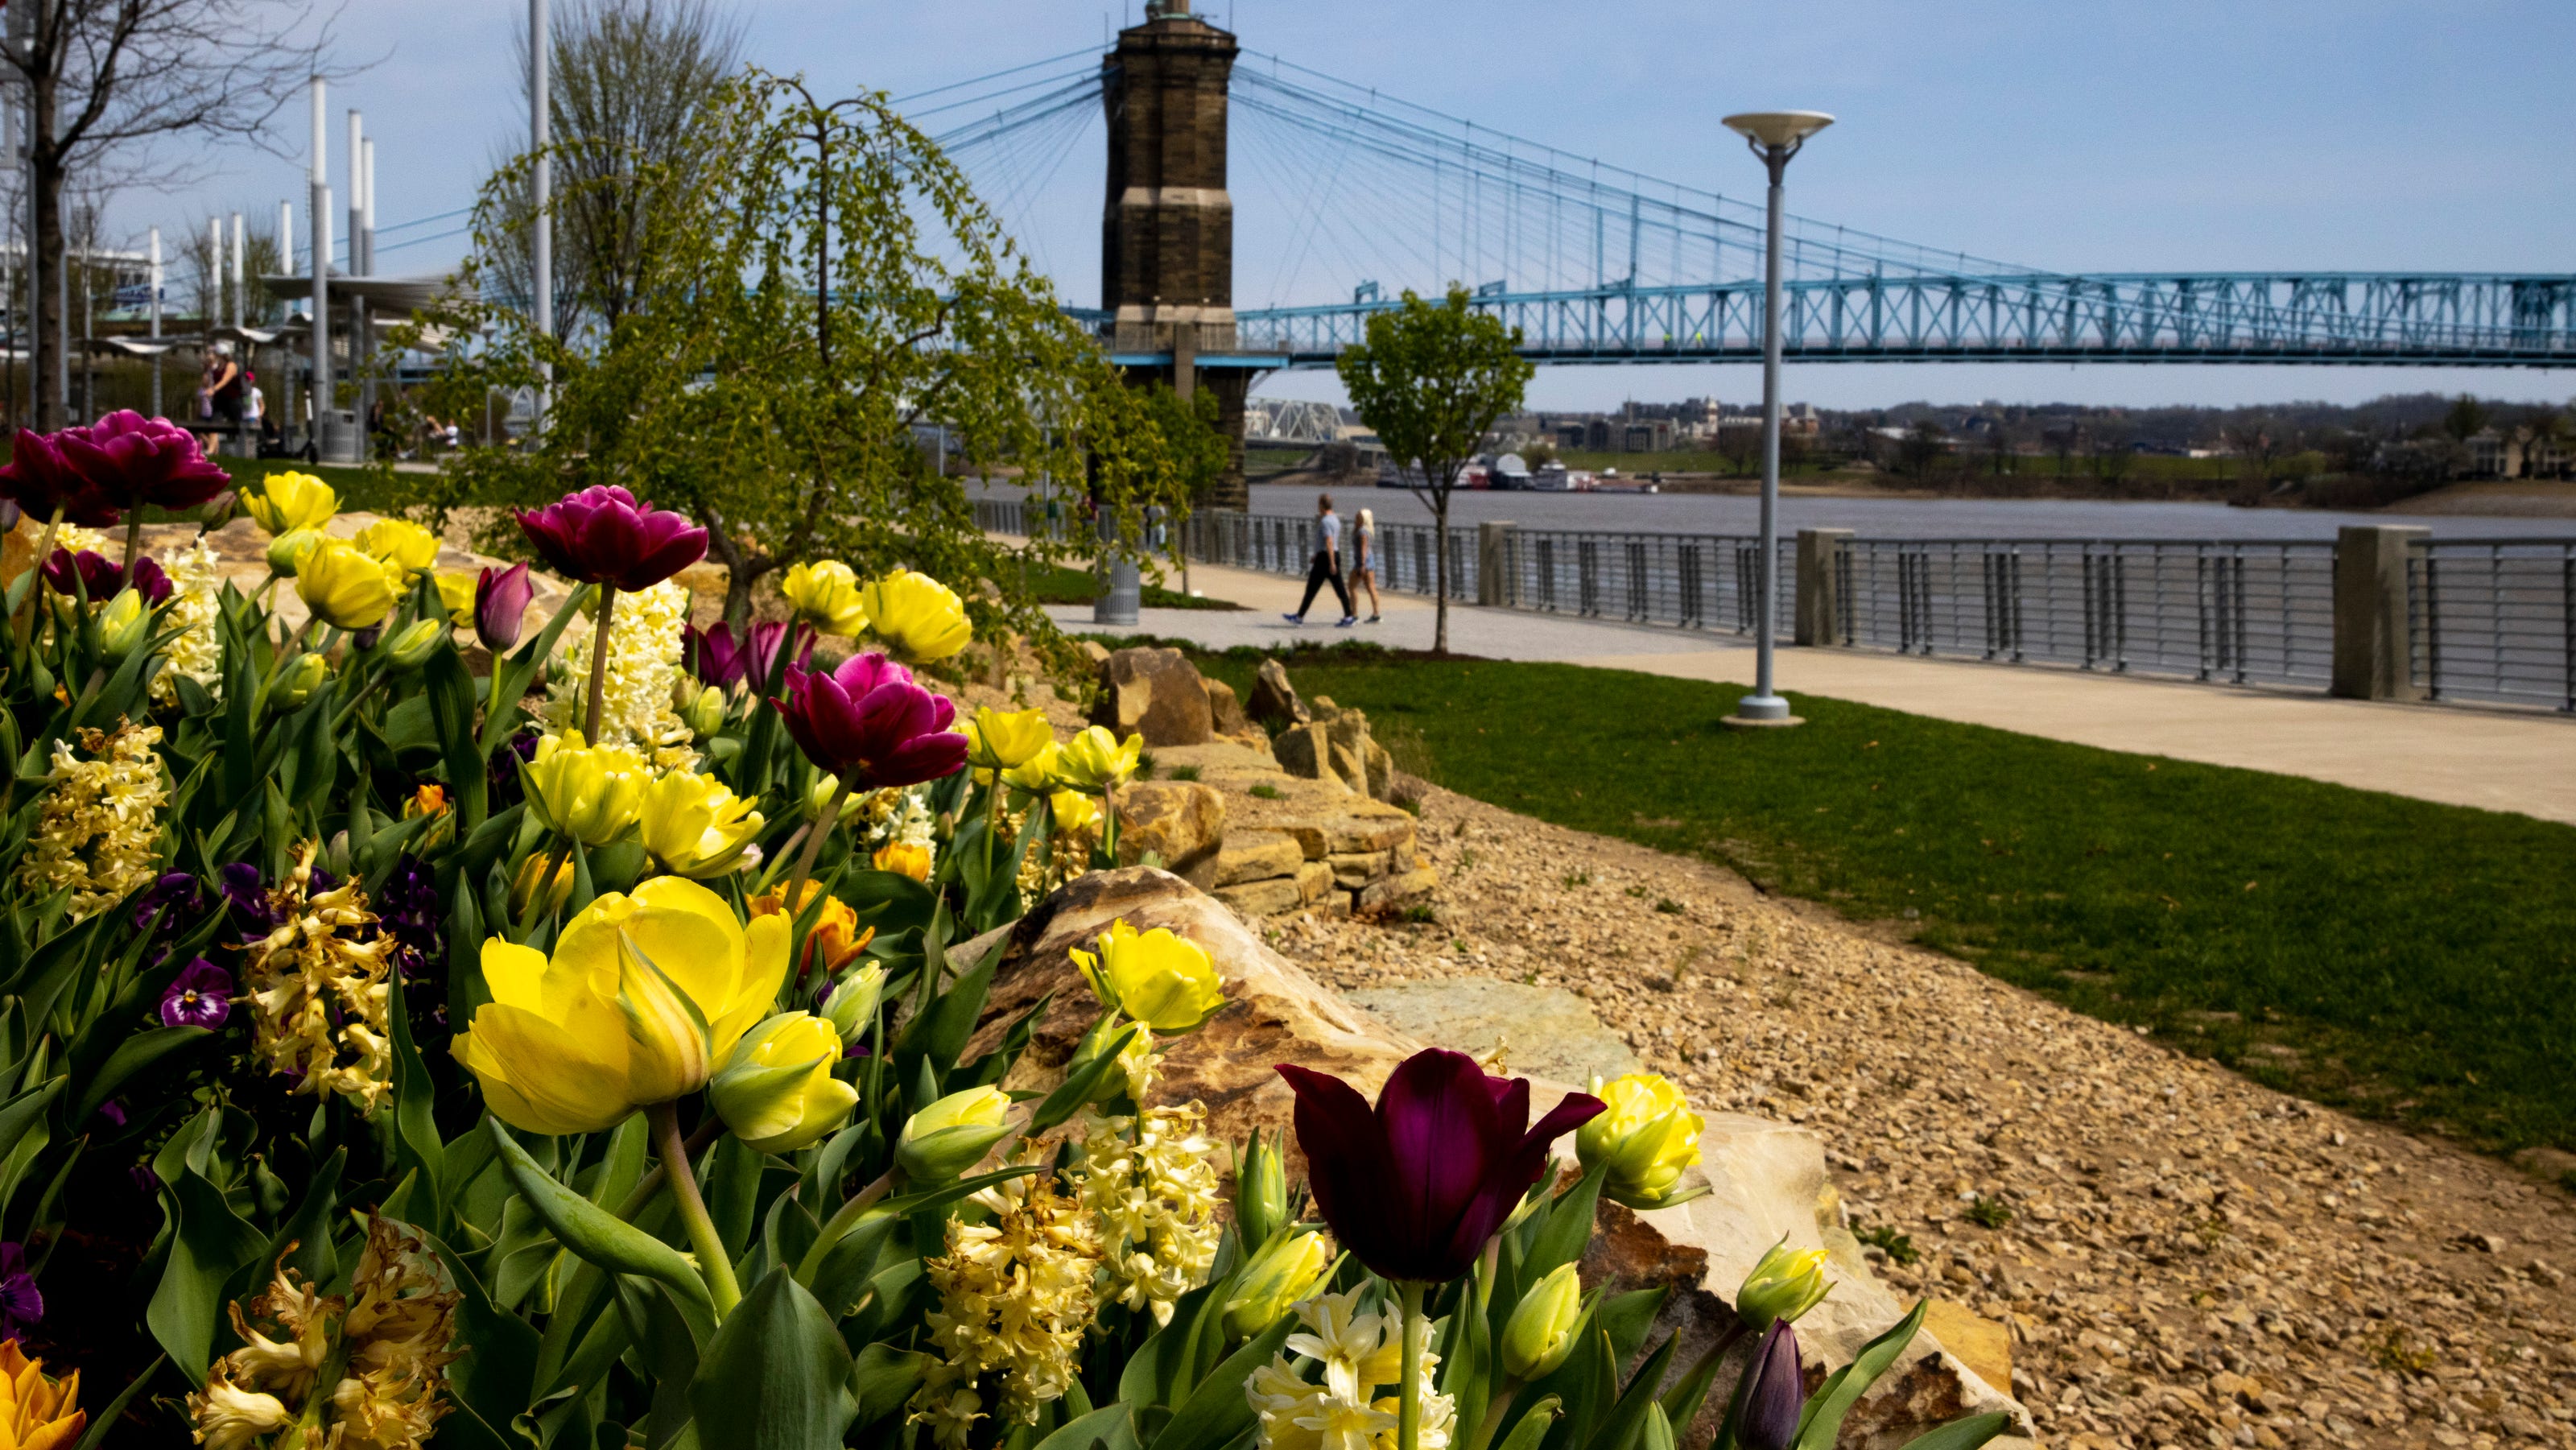  Smale Riverfront Park named best riverwalk in America by USA TODAY, beats out San Antonio 